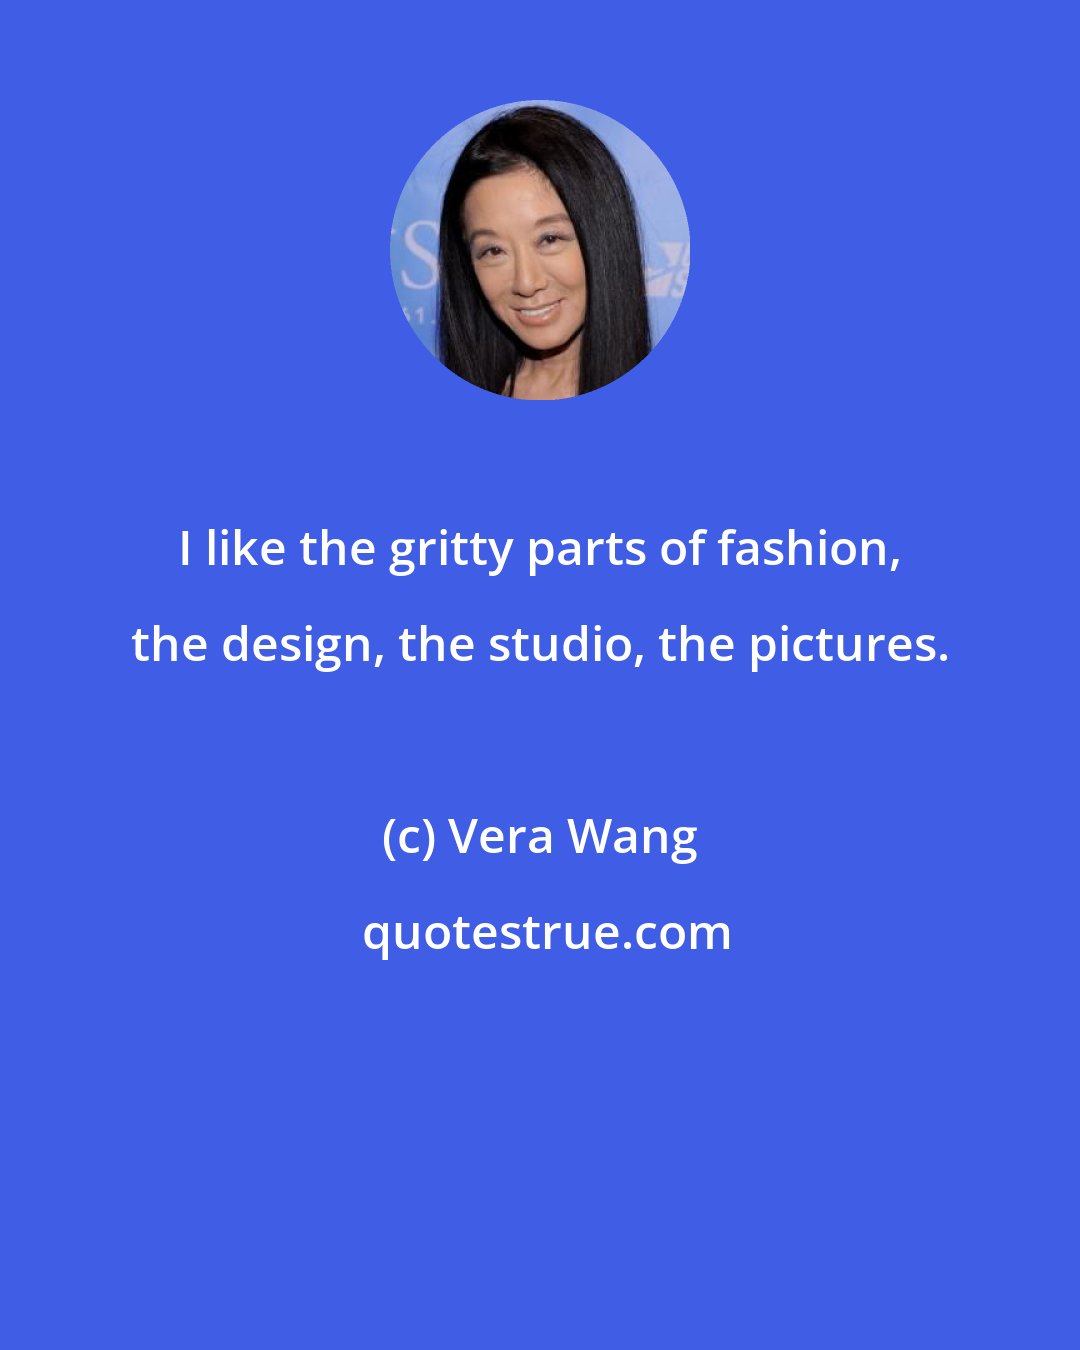 Vera Wang: I like the gritty parts of fashion, the design, the studio, the pictures.